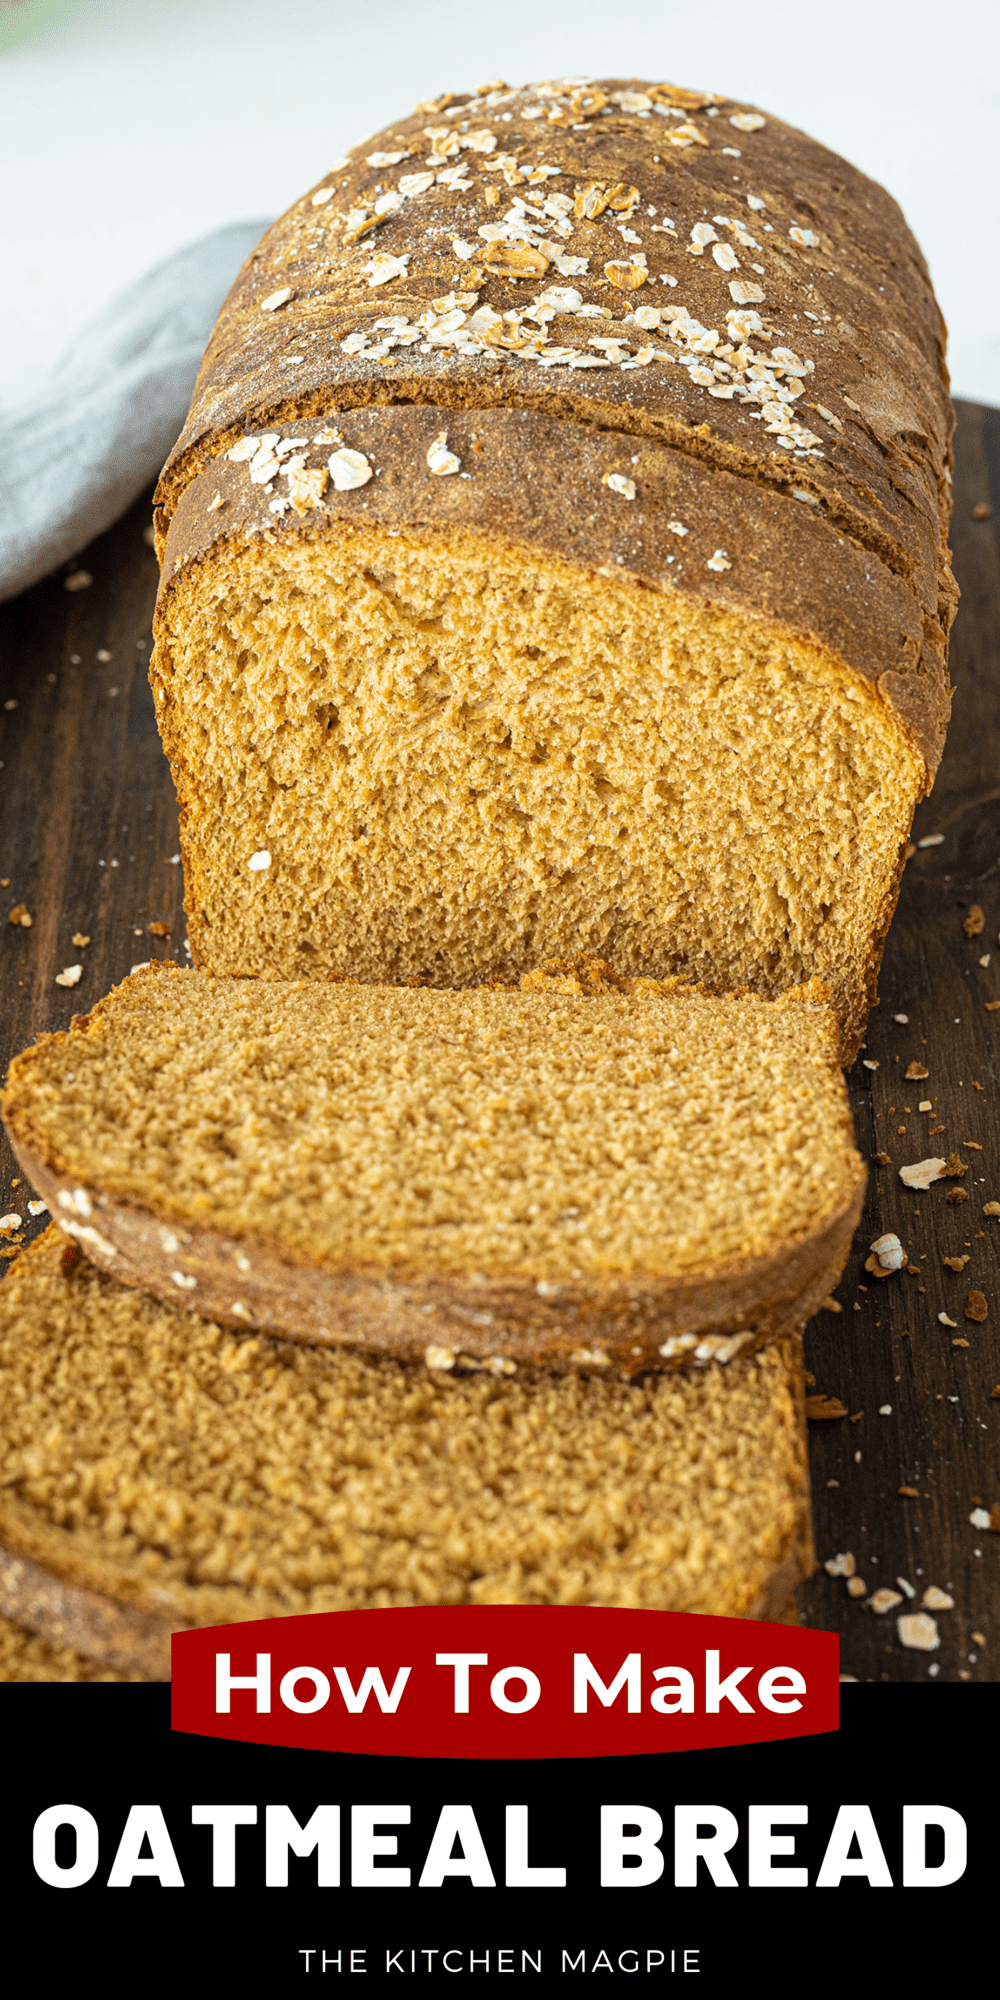 Delicious oatmeal bread with whole wheat, molasses and the chew of oatmeal, this recipe doubles well for larger batches. 